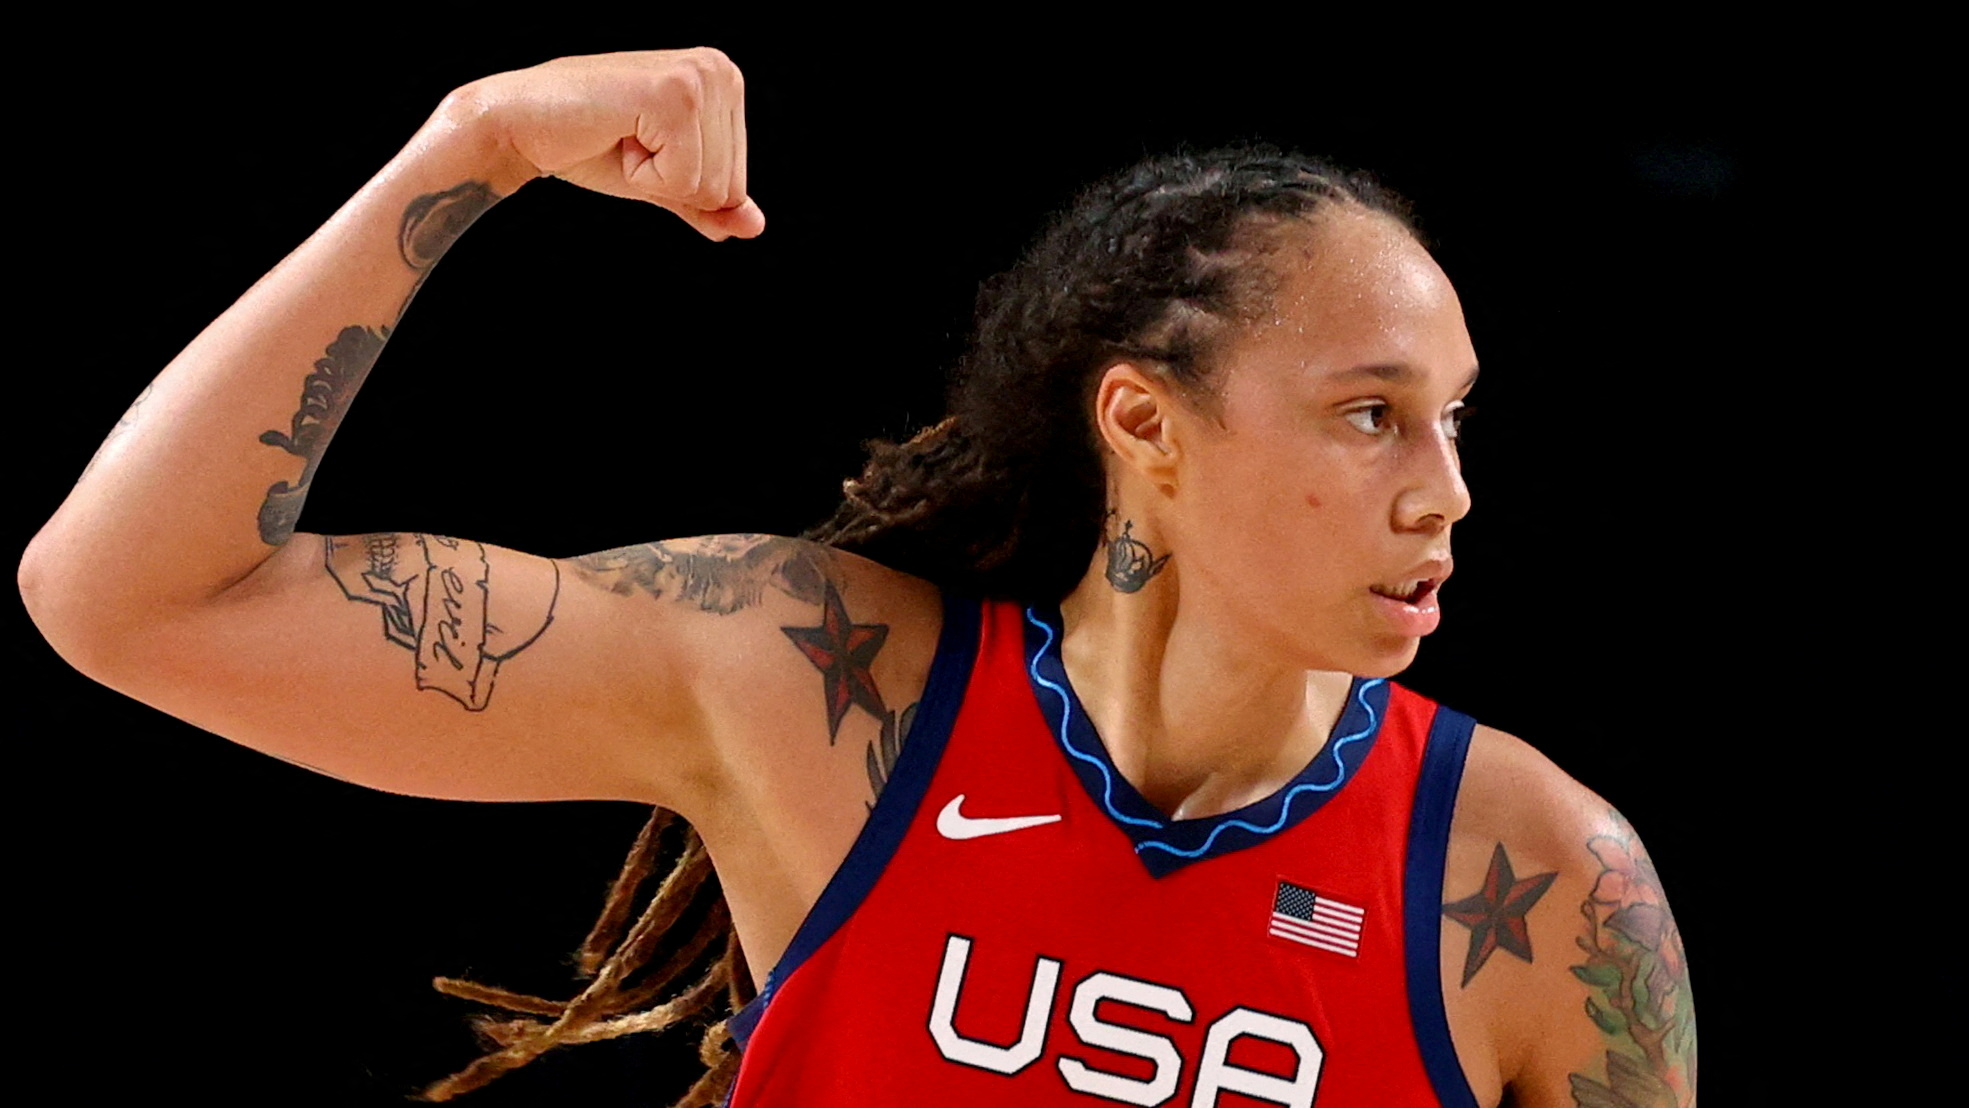 WNBA Player, Brittney Griner, Detained in Russia for Vape Cartridges